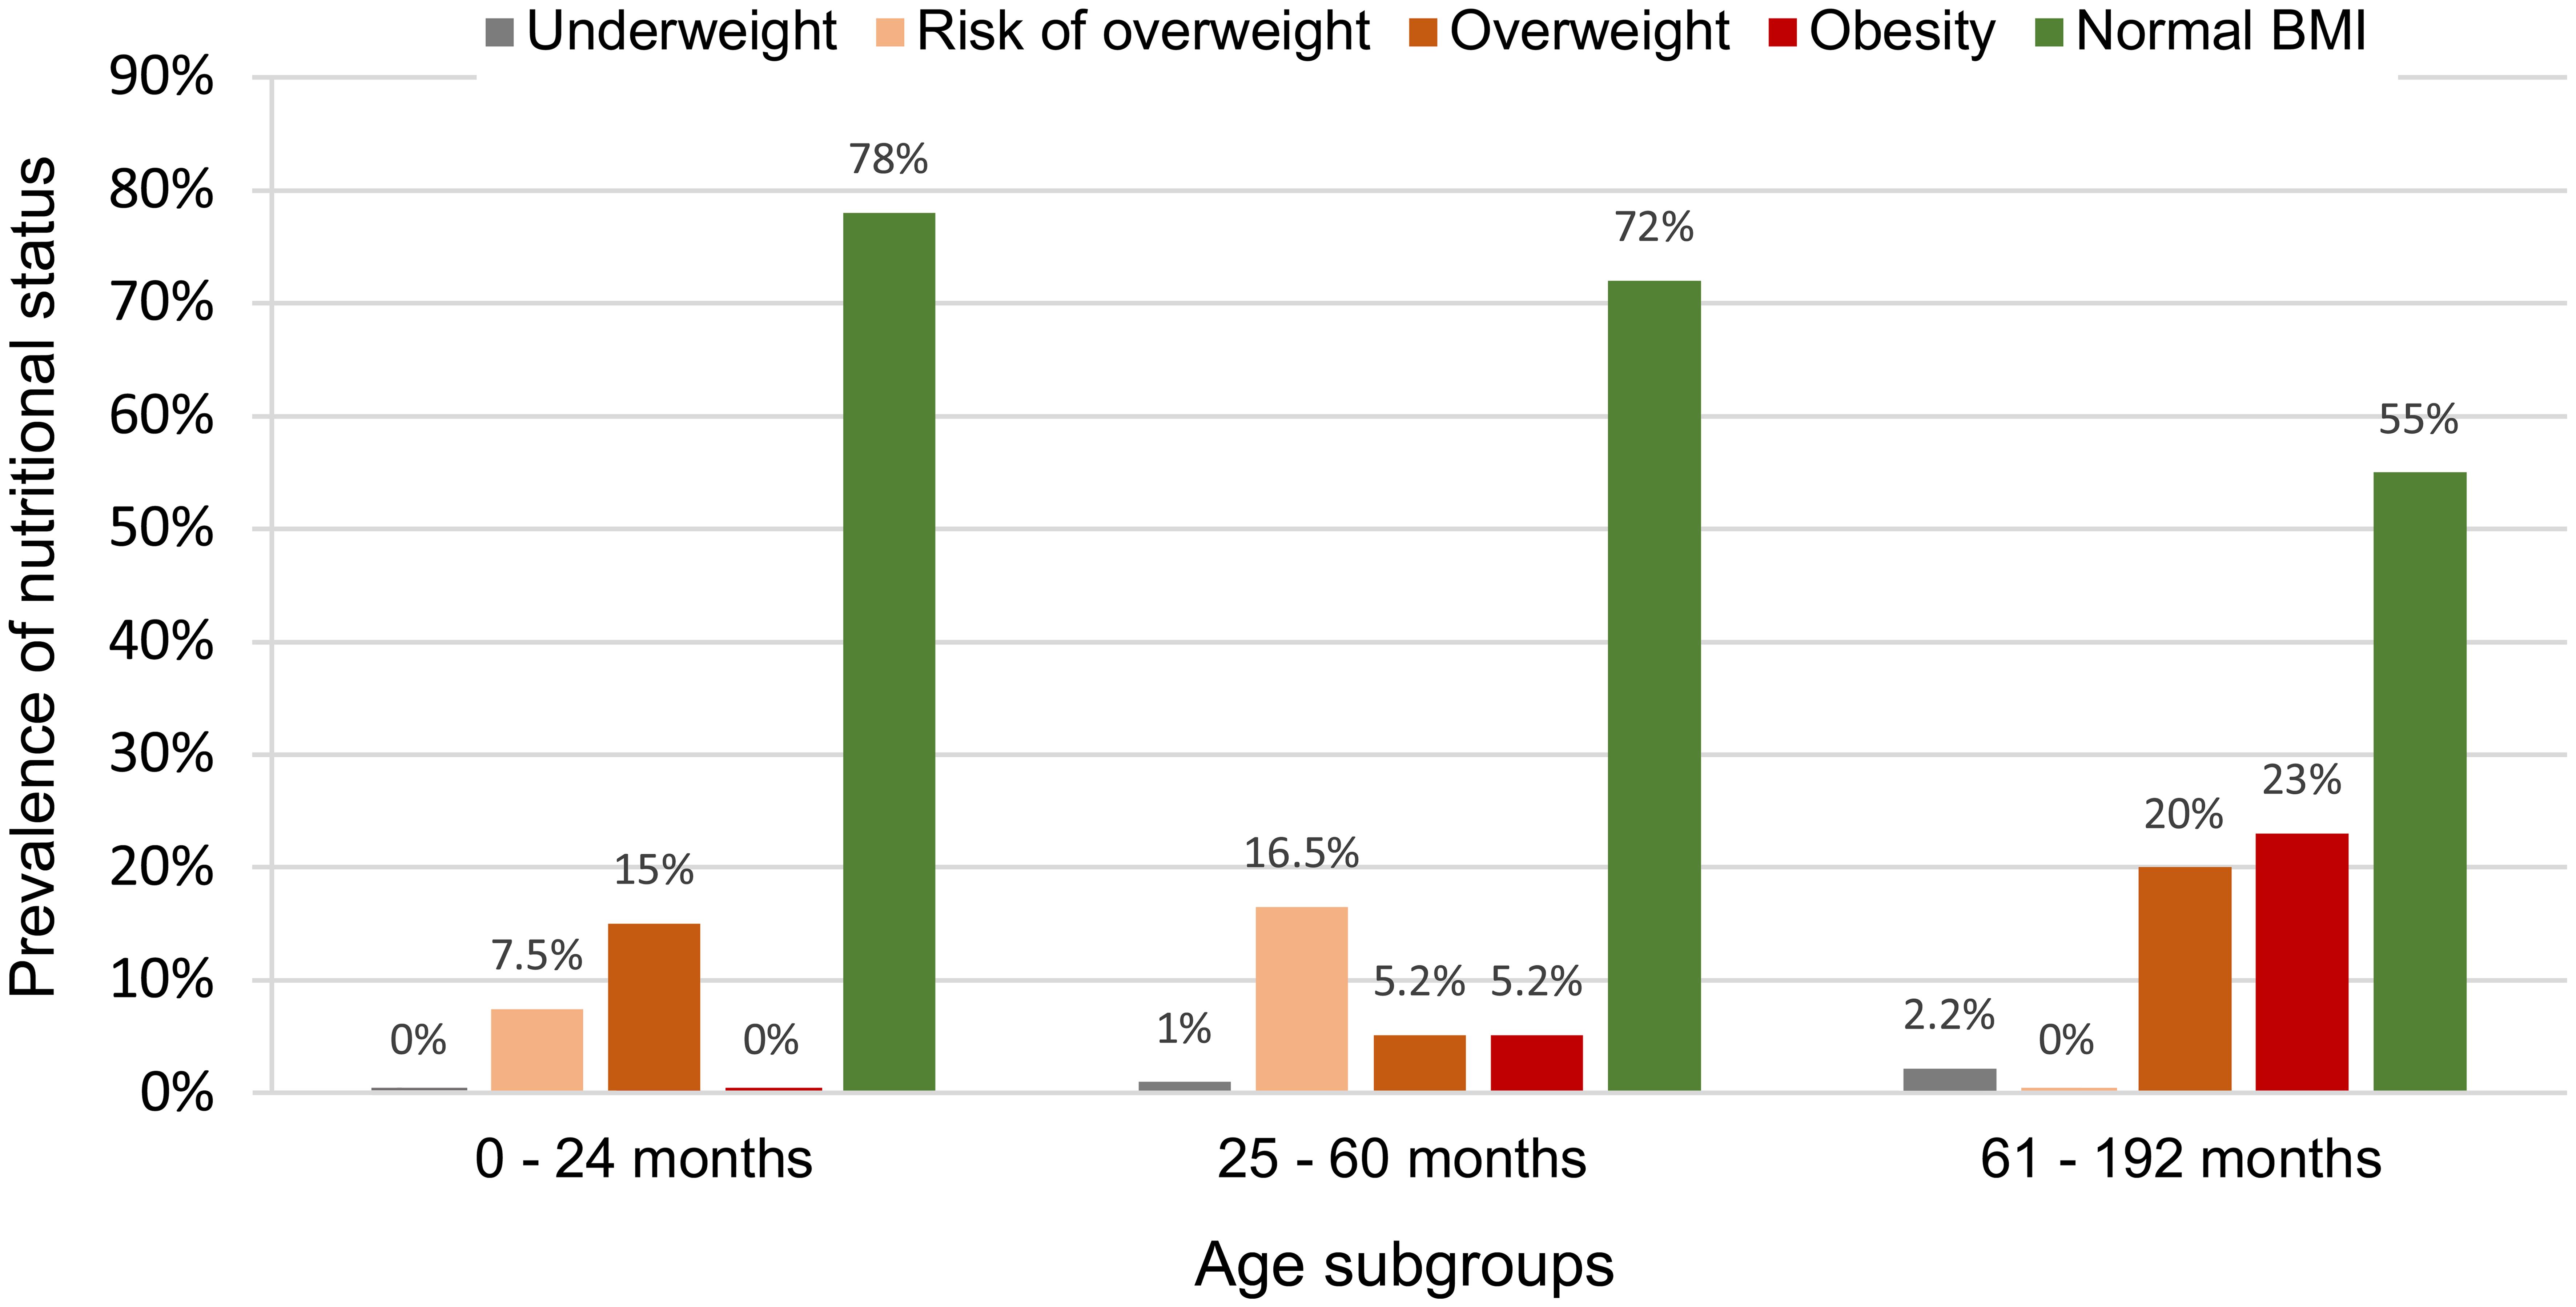 Prevalence of nutritional status in children/adolescents with functional constipation according to the three age subgroups.